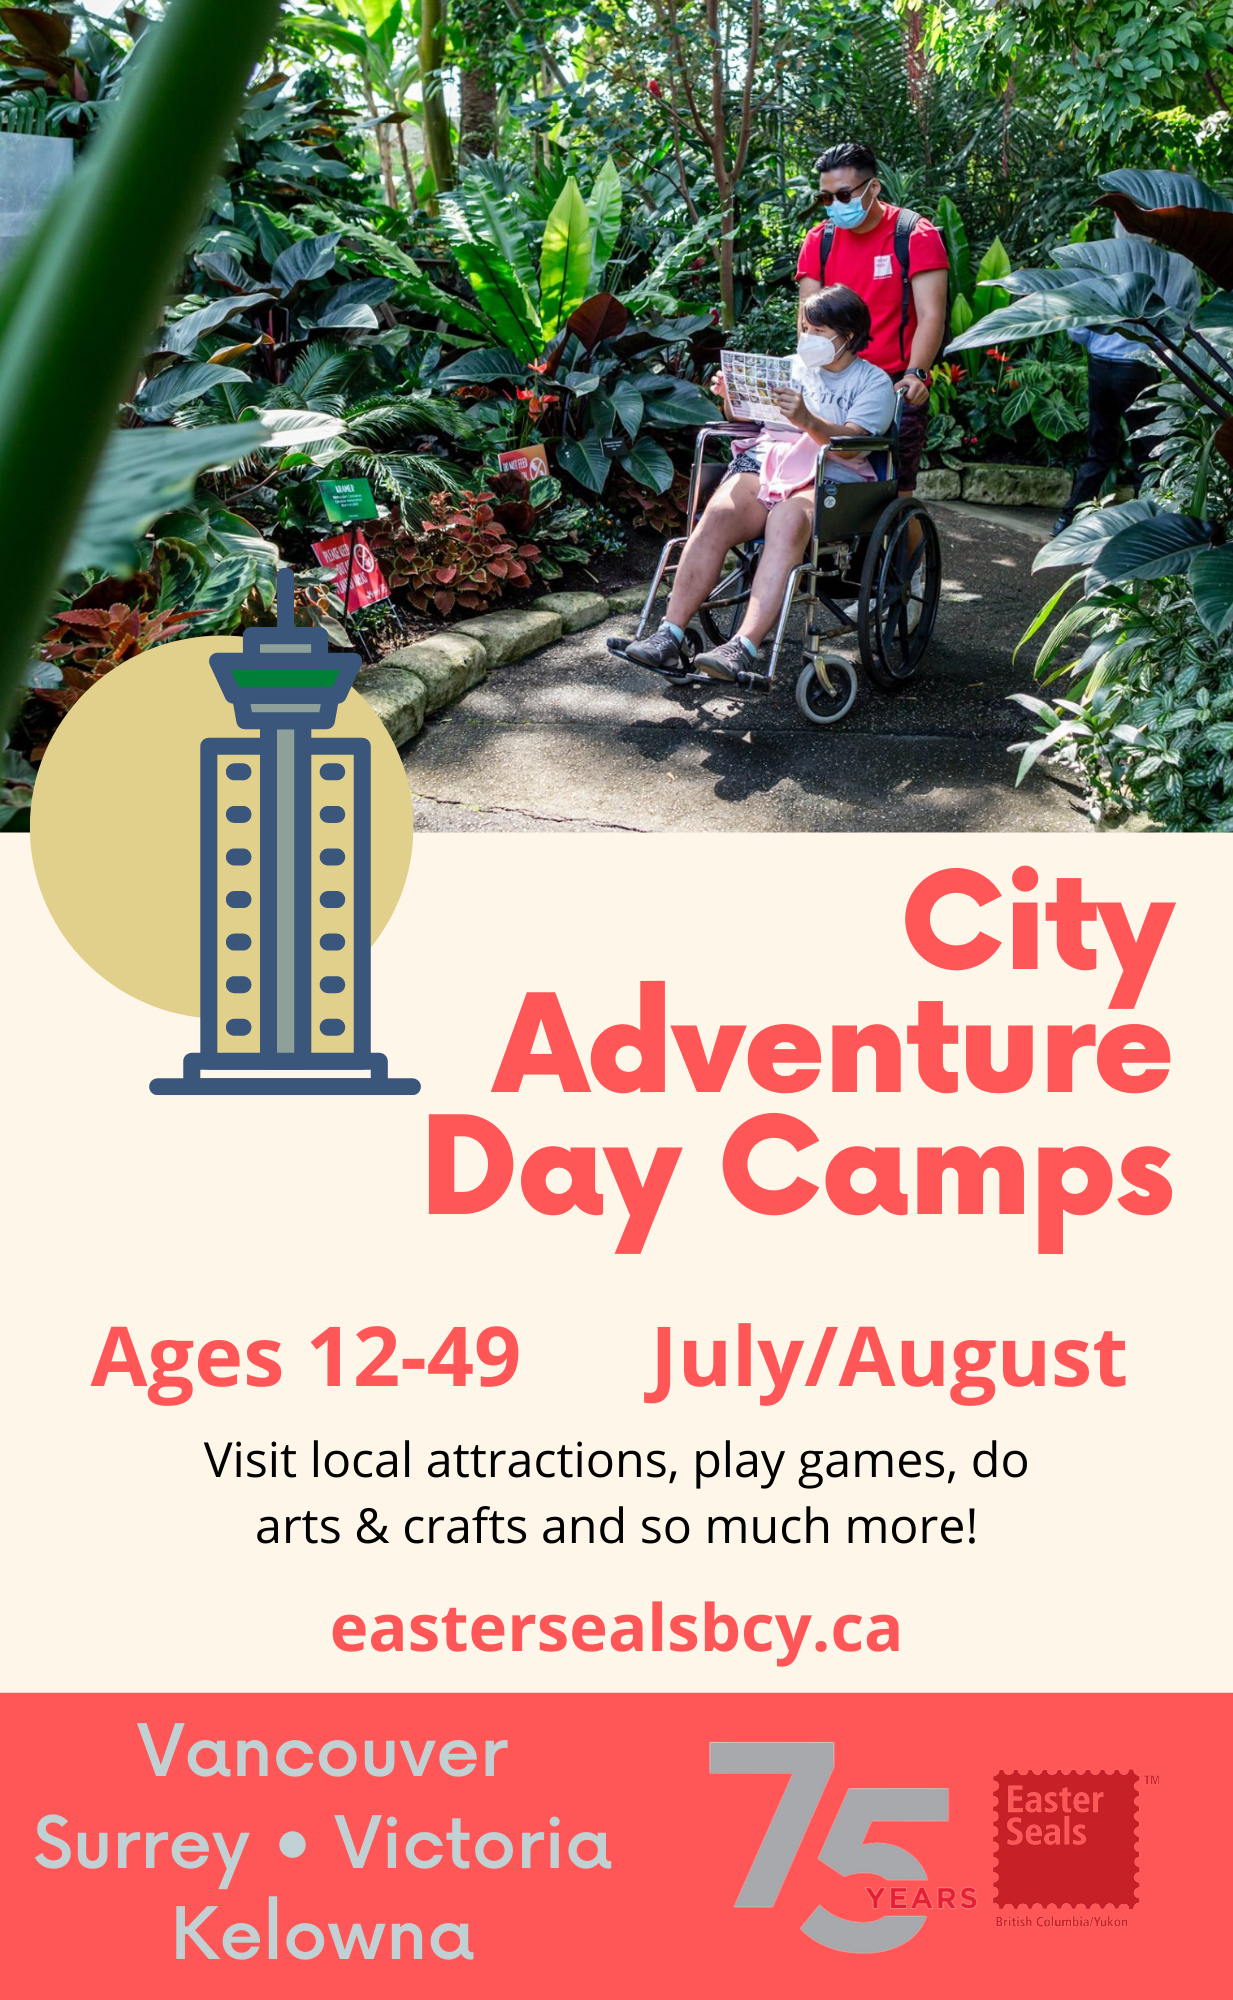 City Adventure Day Camps (Vancouver)